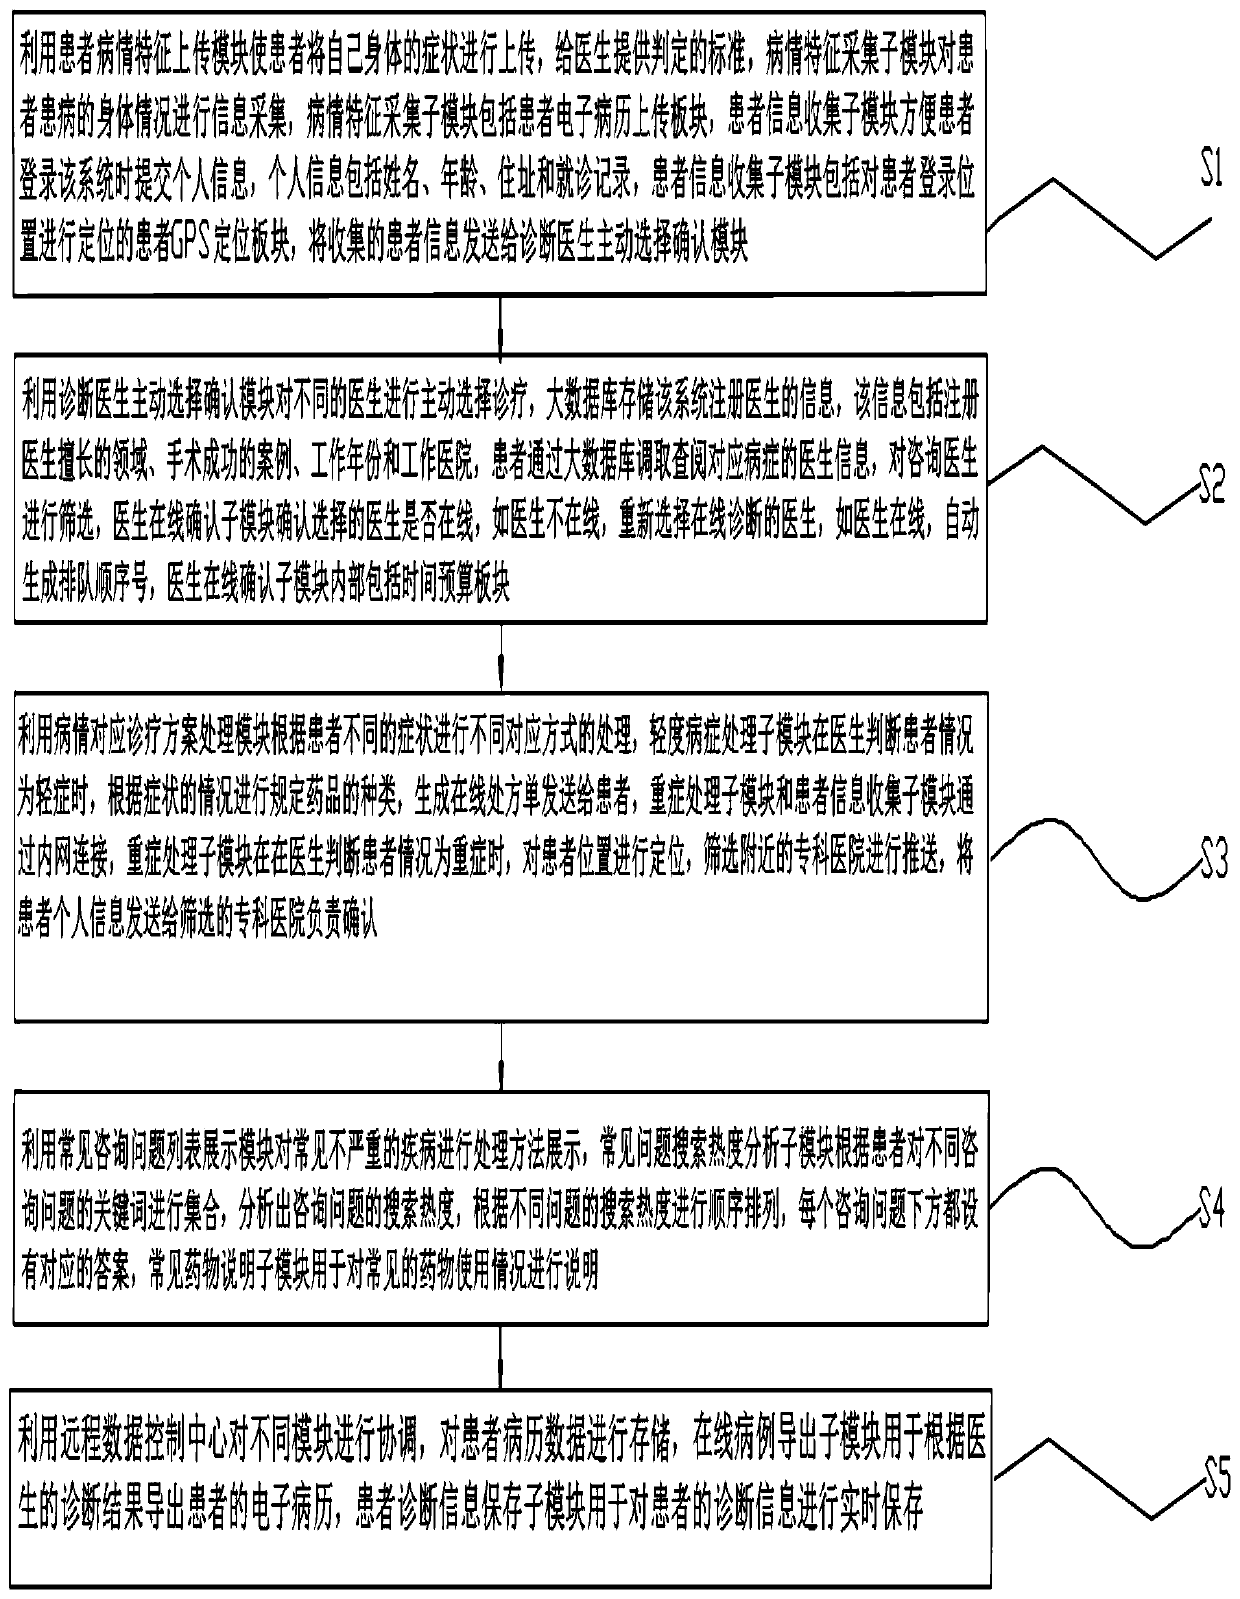 Internet-based medical consultation and online diagnosis system and method